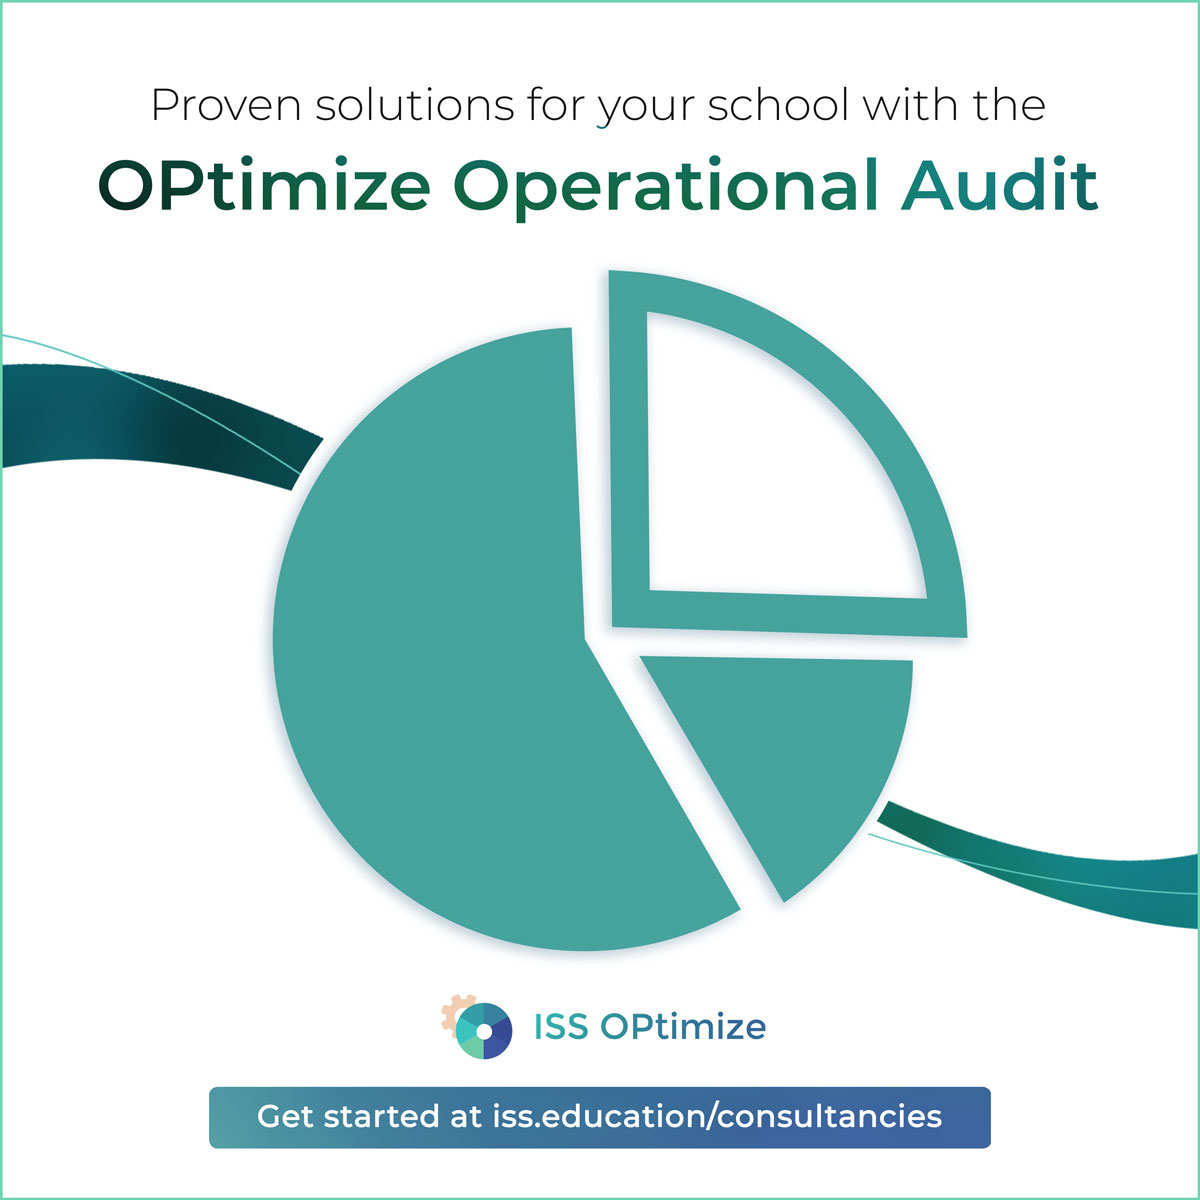 The ISS OPtimize Operational Audit offers key back office support for schools seeking operational improvements, financial sustainability, and risk mitigation. Learn more at iss.education/operational-co… #ISSedu #SchoolOps